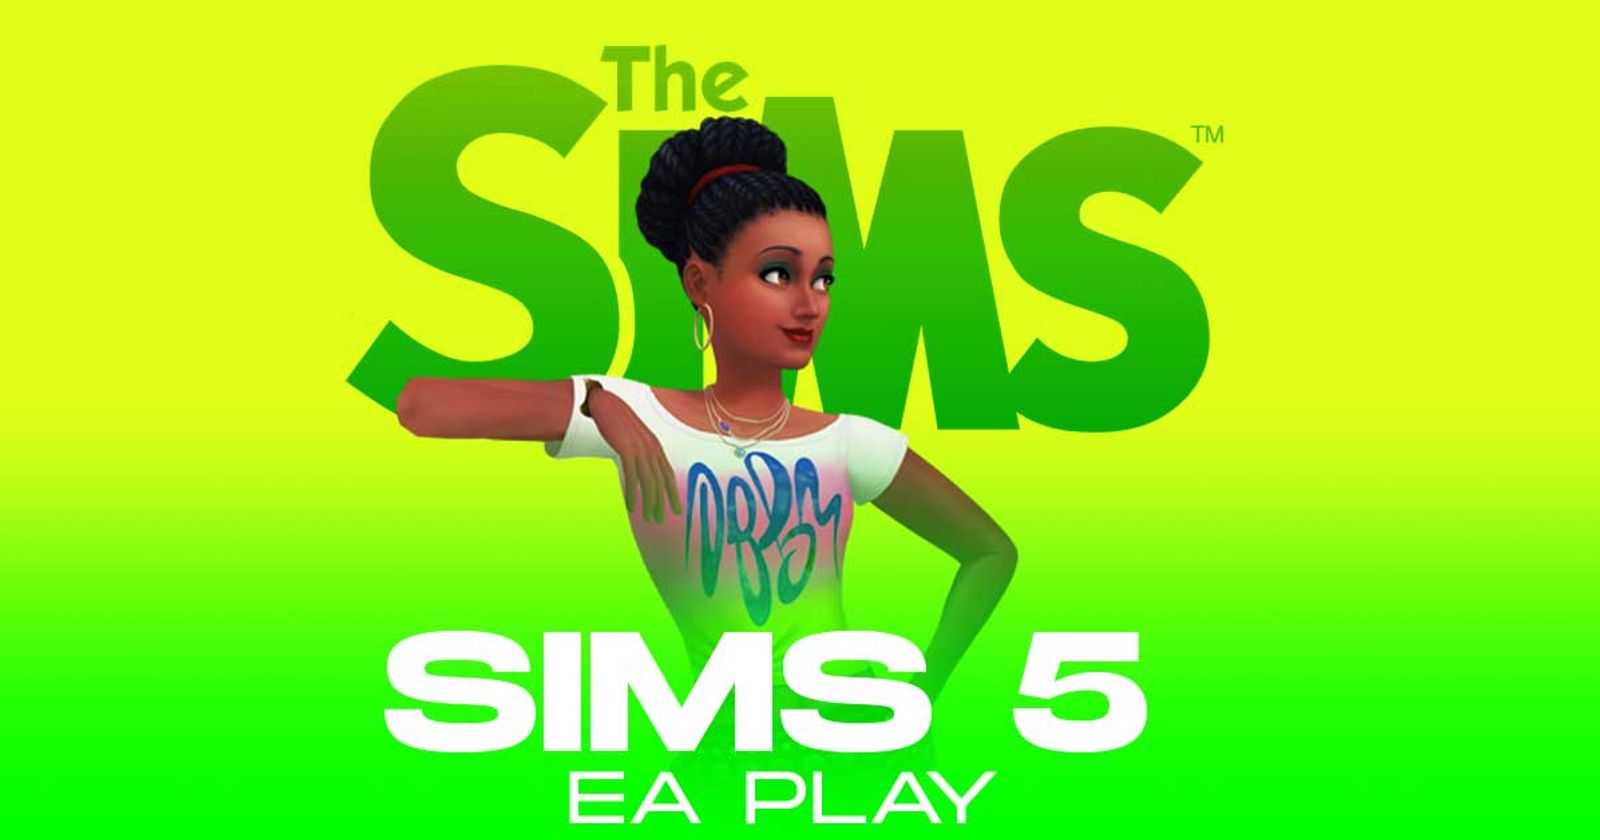 EA Confirms The Sims 5 Will be Free-to-Play